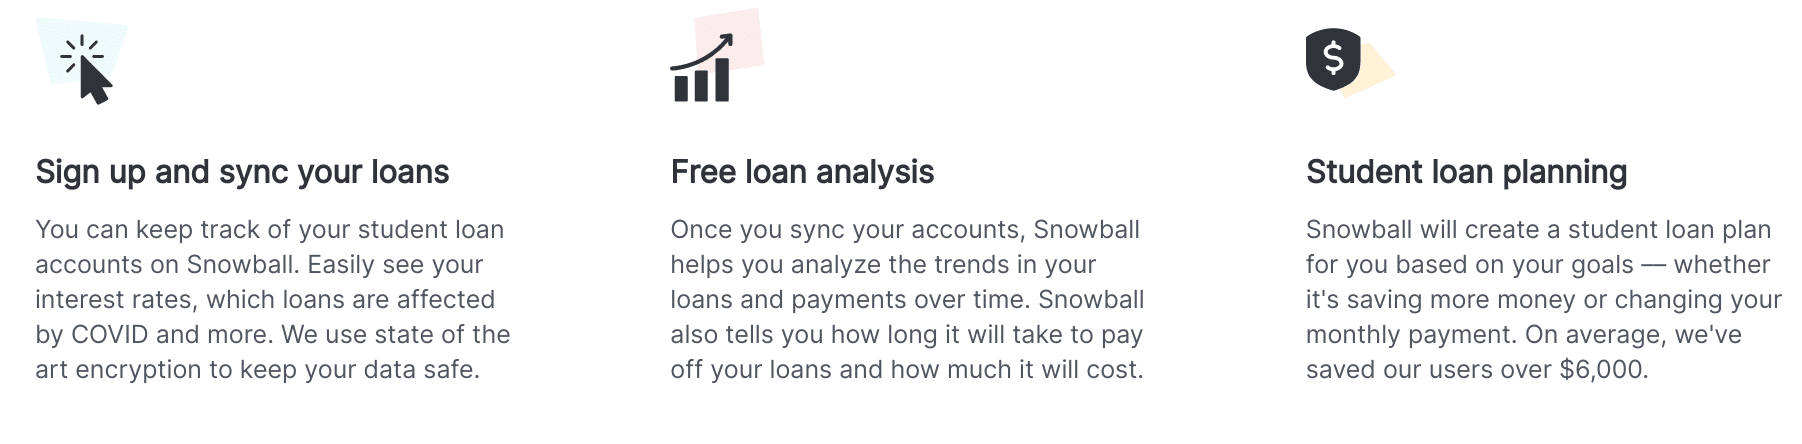 Snowball wealth tools